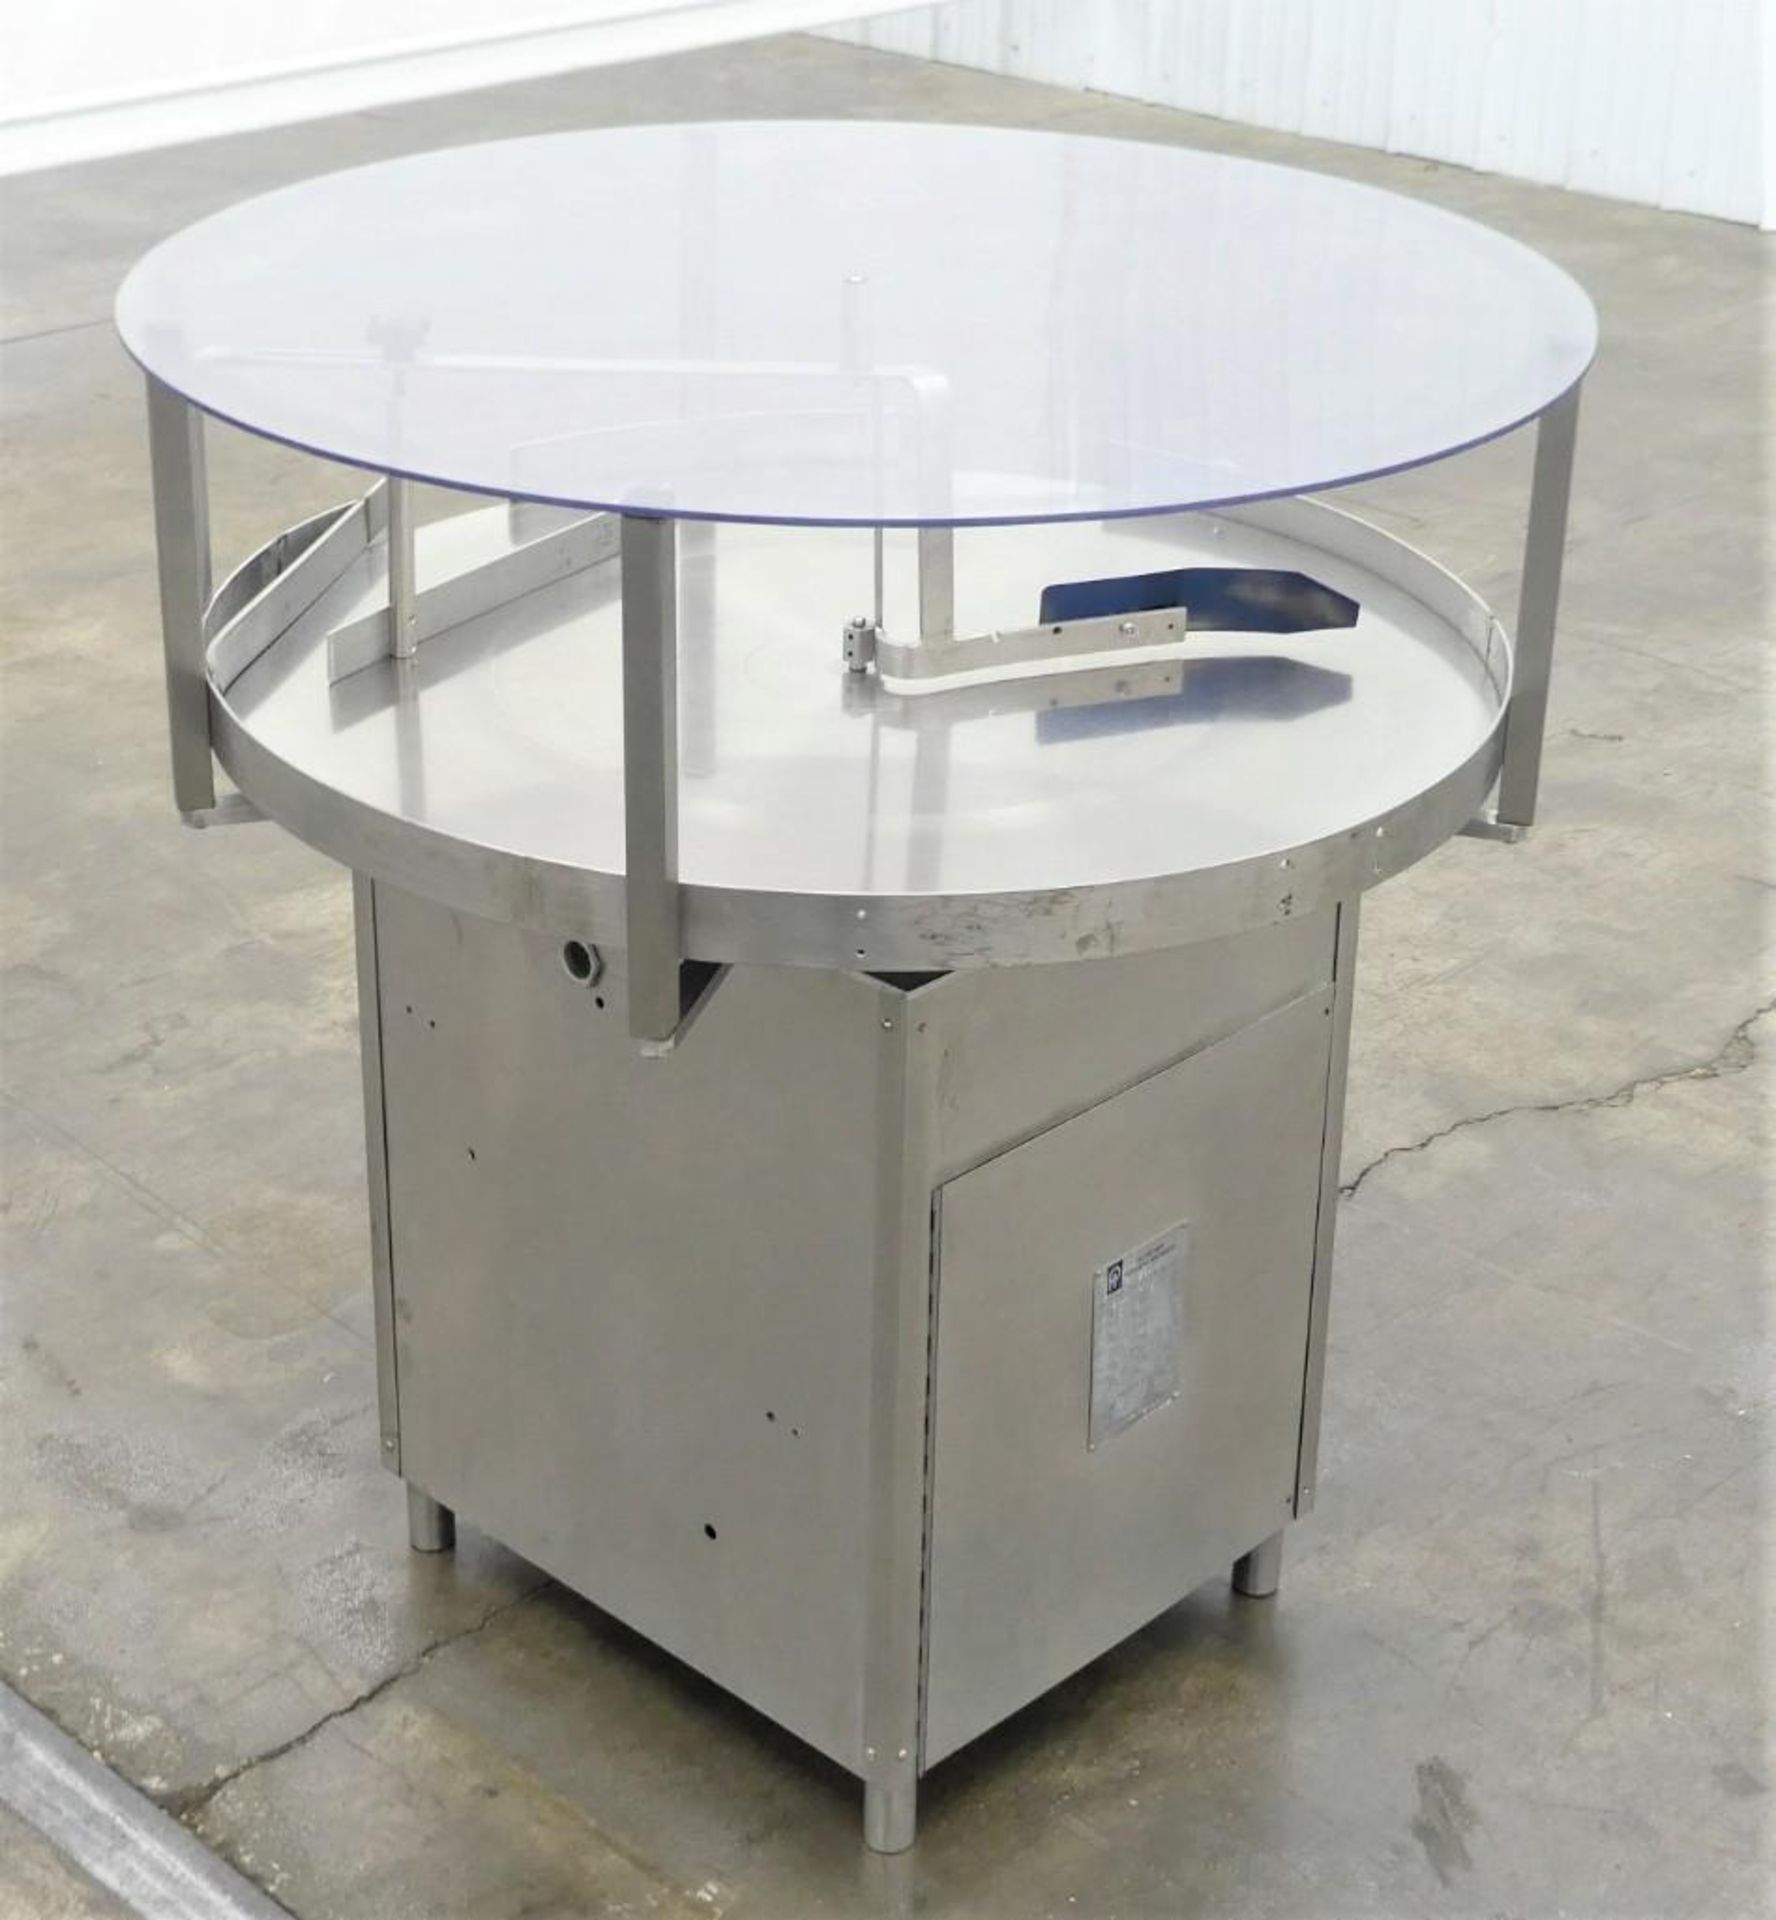 36" Rotary Accumulation Table - Image 3 of 11